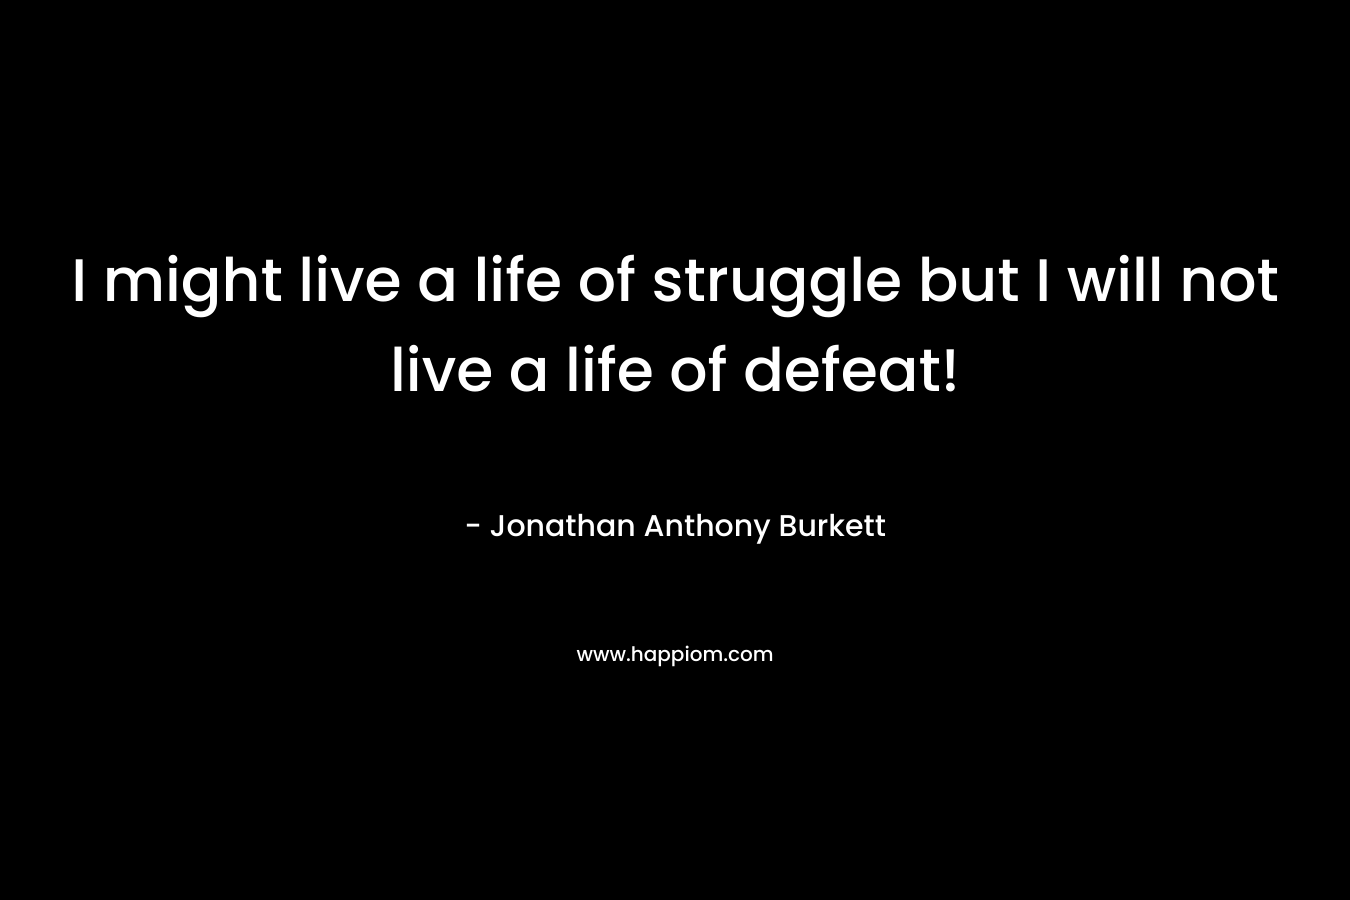 I might live a life of struggle but I will not live a life of defeat!